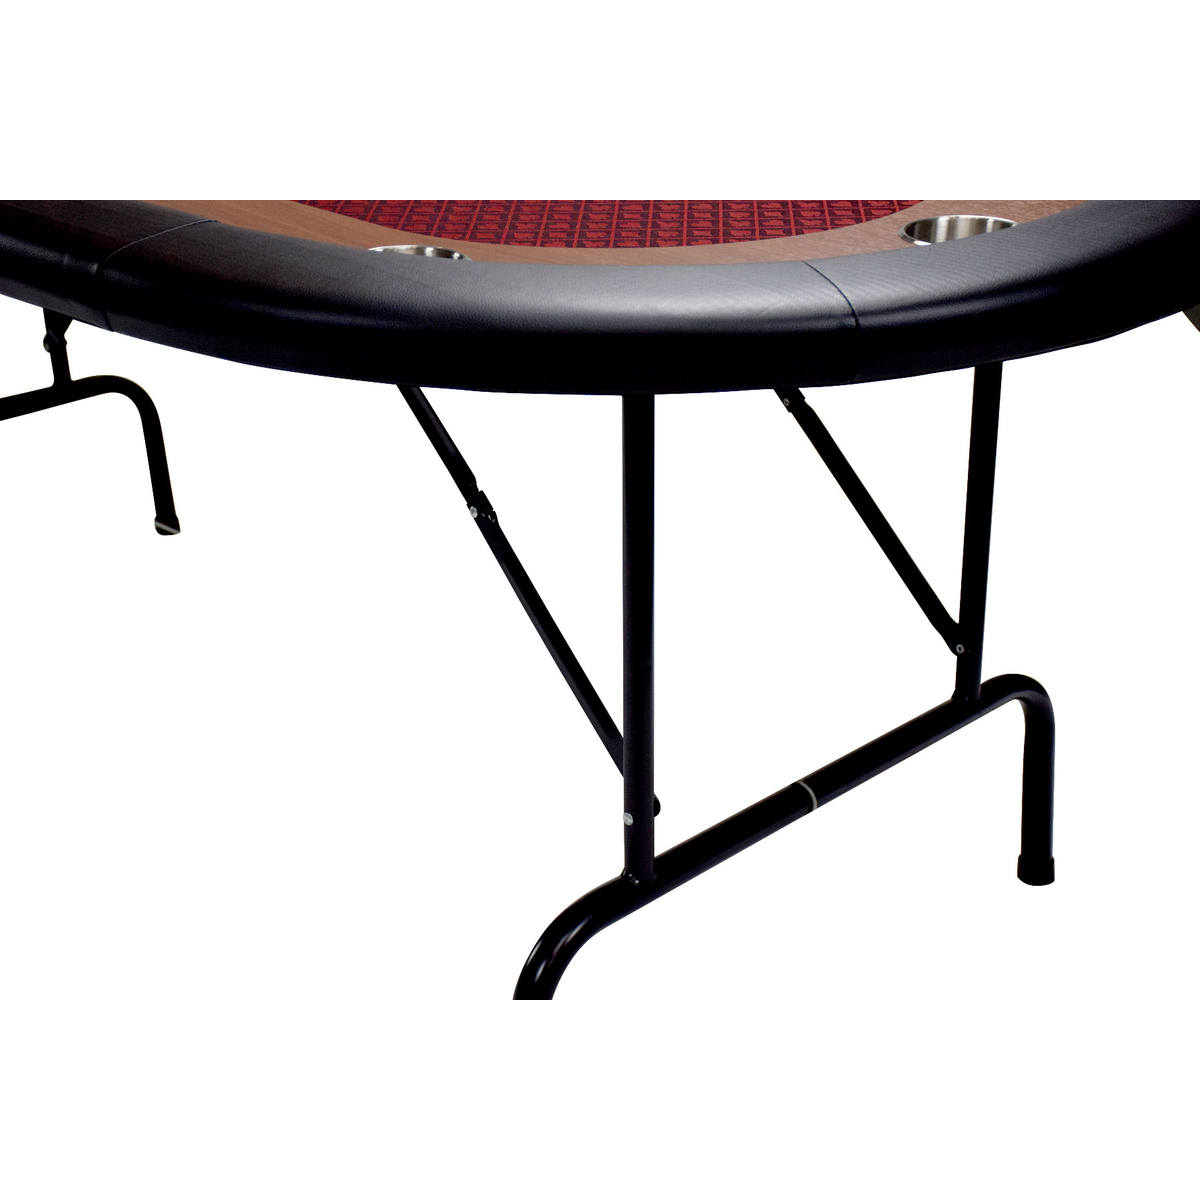 North Poker Table Foldy 10 Personnes Rouge